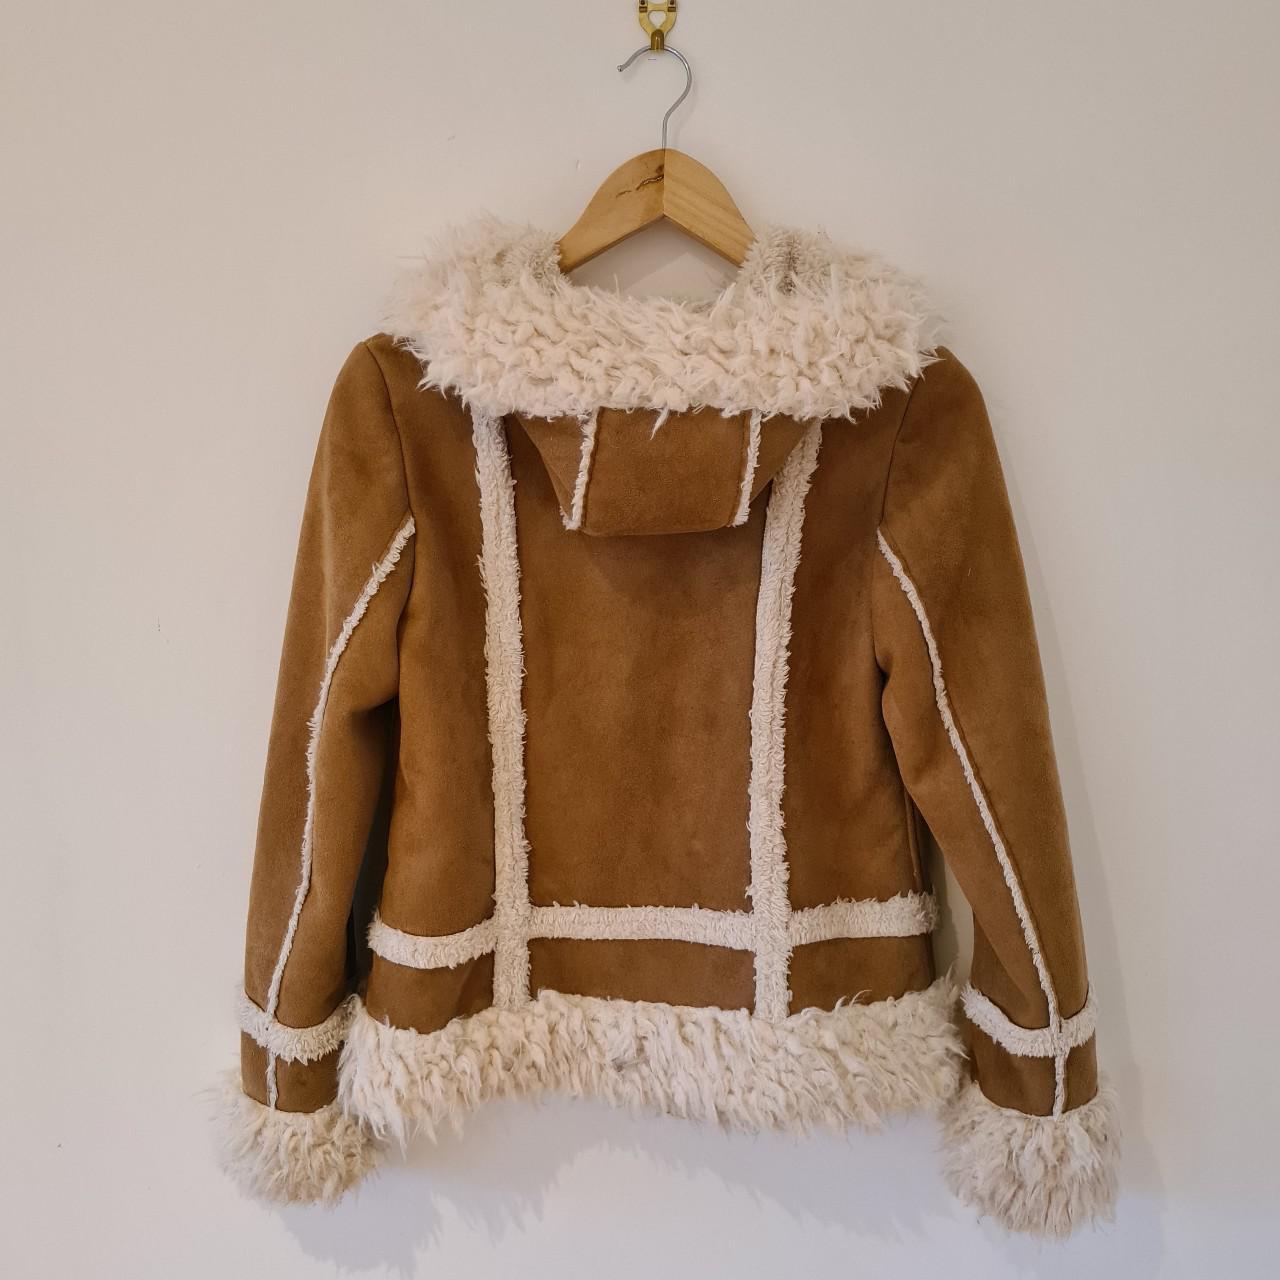 Vintage sheep skin jacket in tan colour with a... - Depop